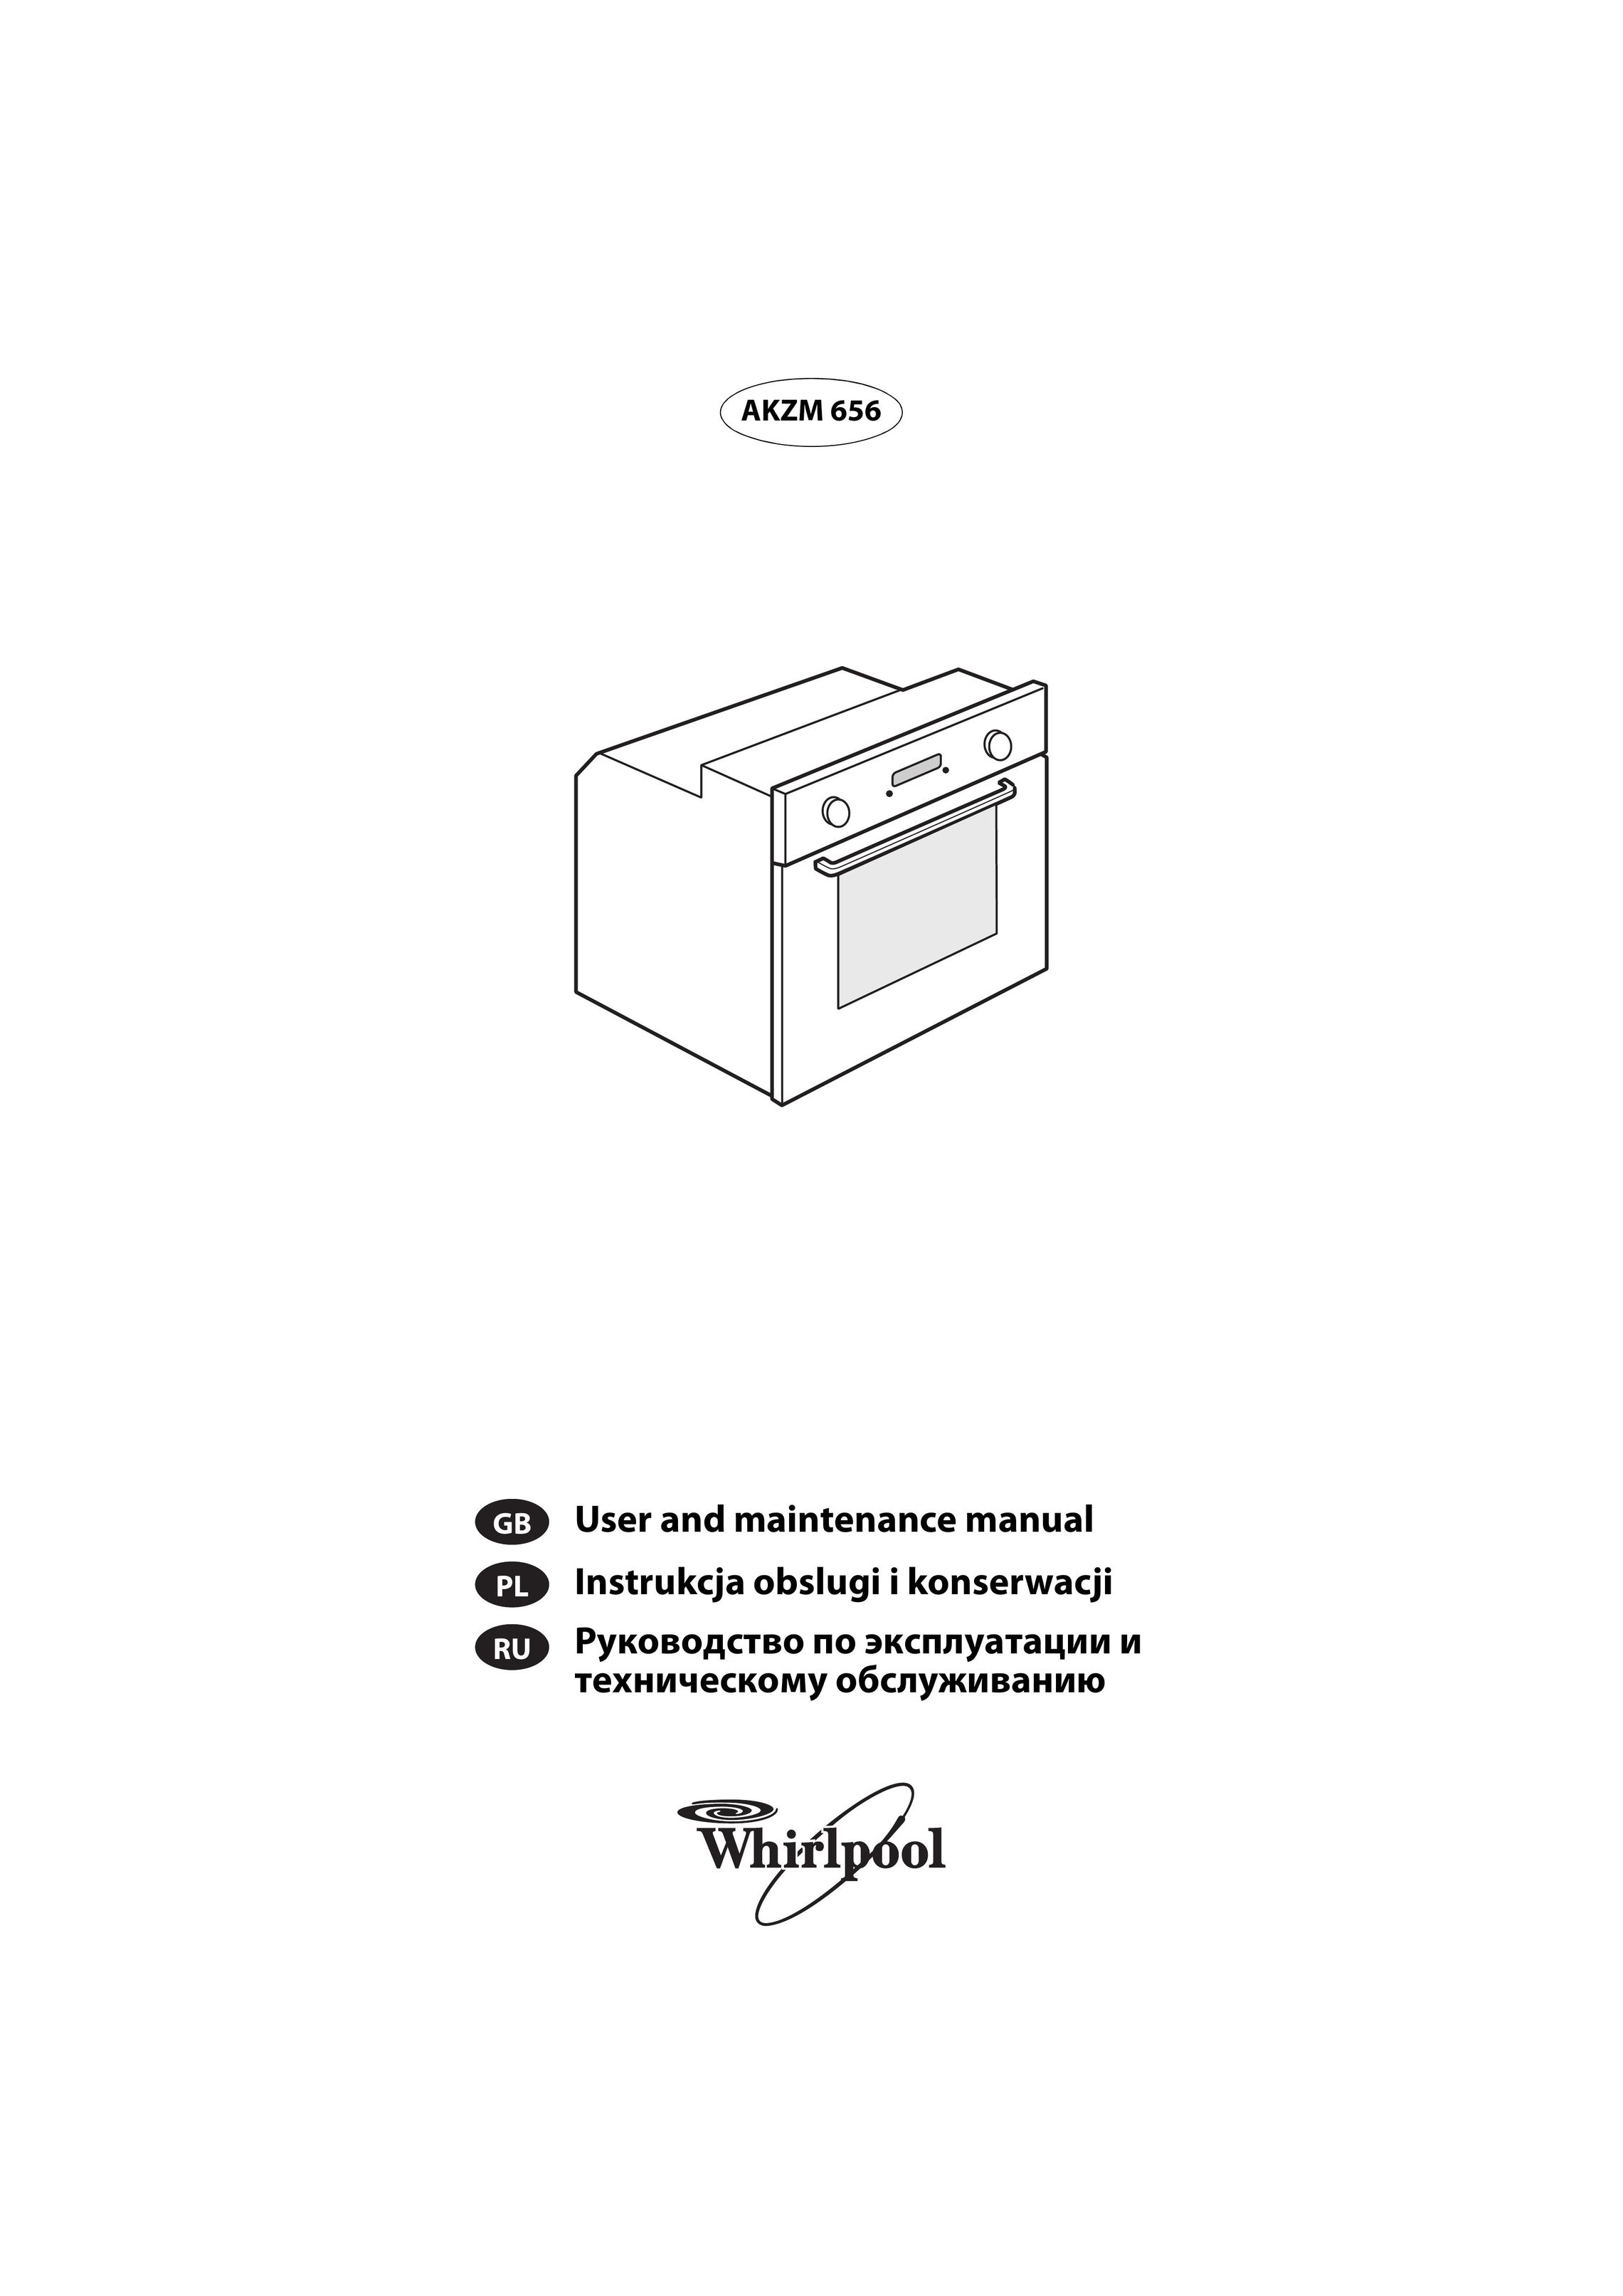 Whirlpool AKZM 656 Oven User Manual